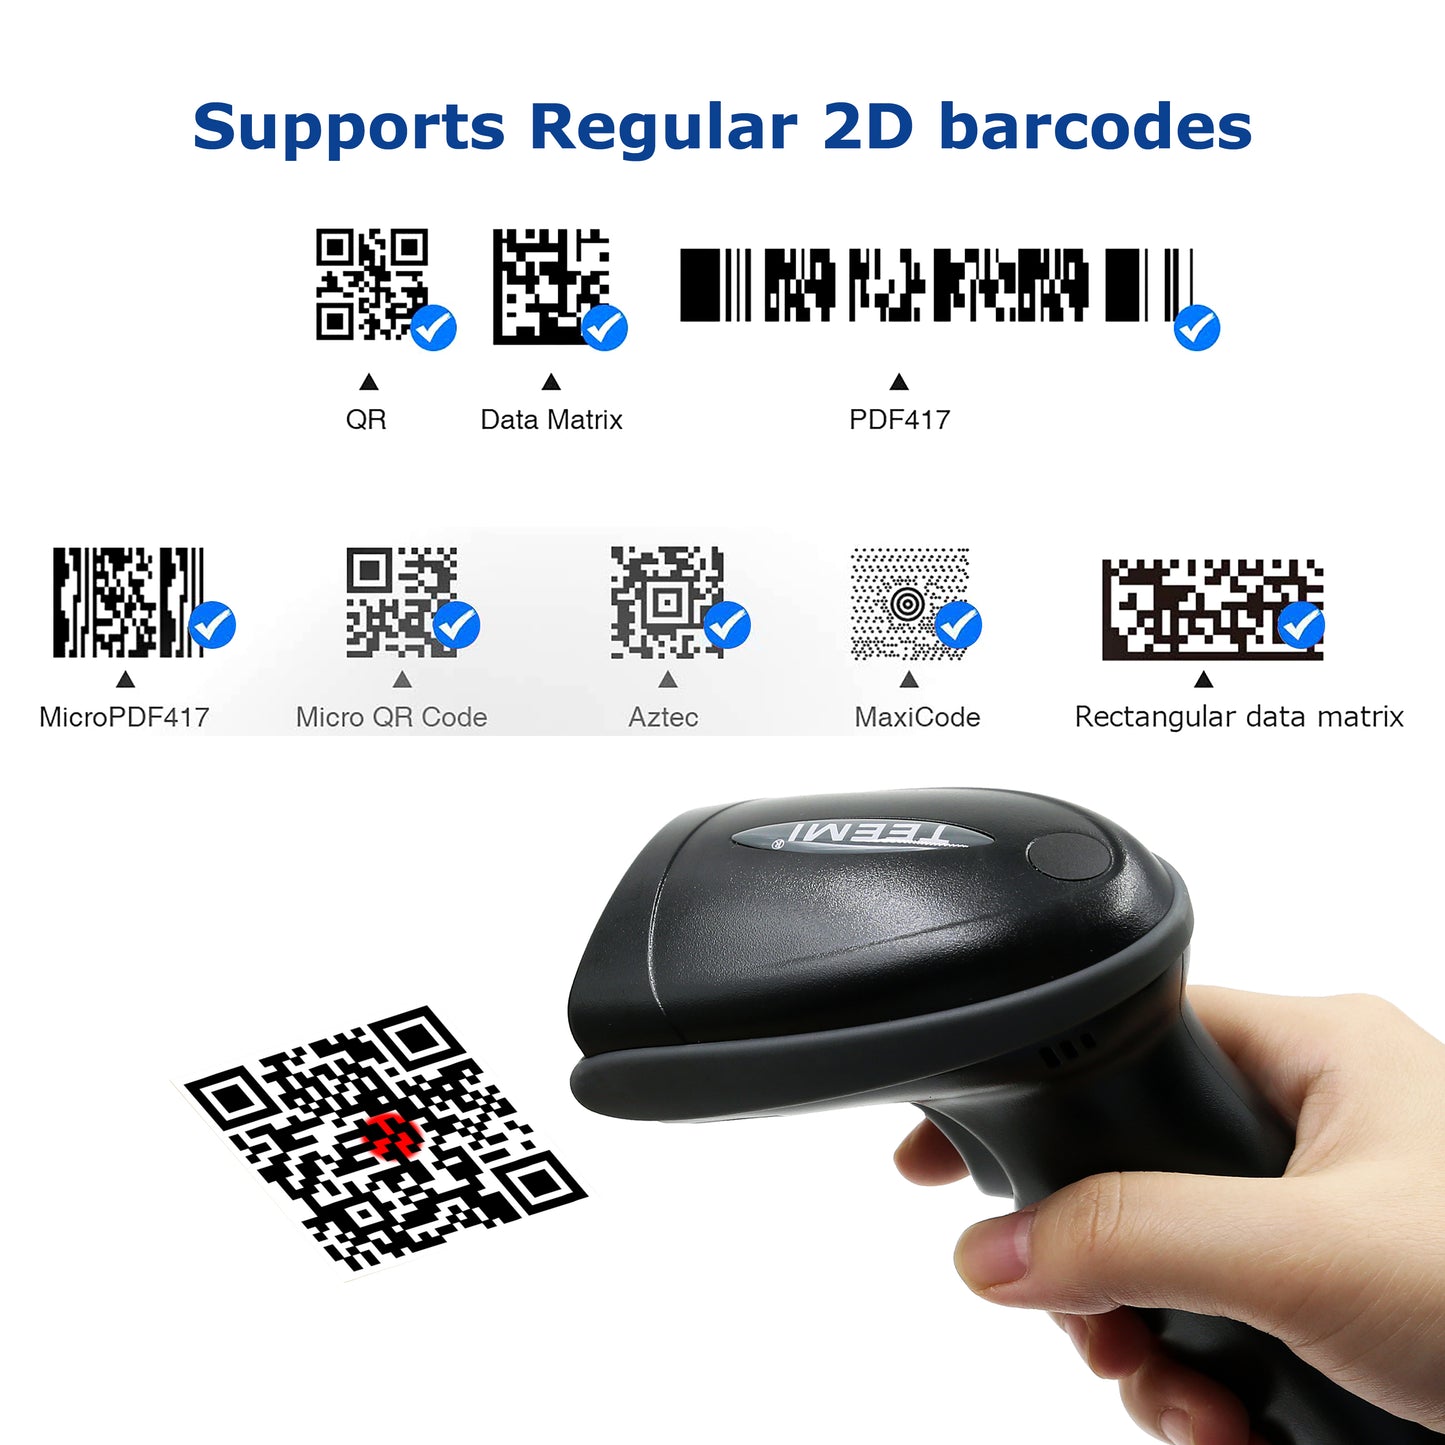 Case of 20, TEEMI TMSL-55CR 2D Bluetooth Barcode Scanner with USB Cradle, Handheld Handsfree Automatic Screen Scanning Scan QR Datamatrix PDF417 Postal and OCR Codes